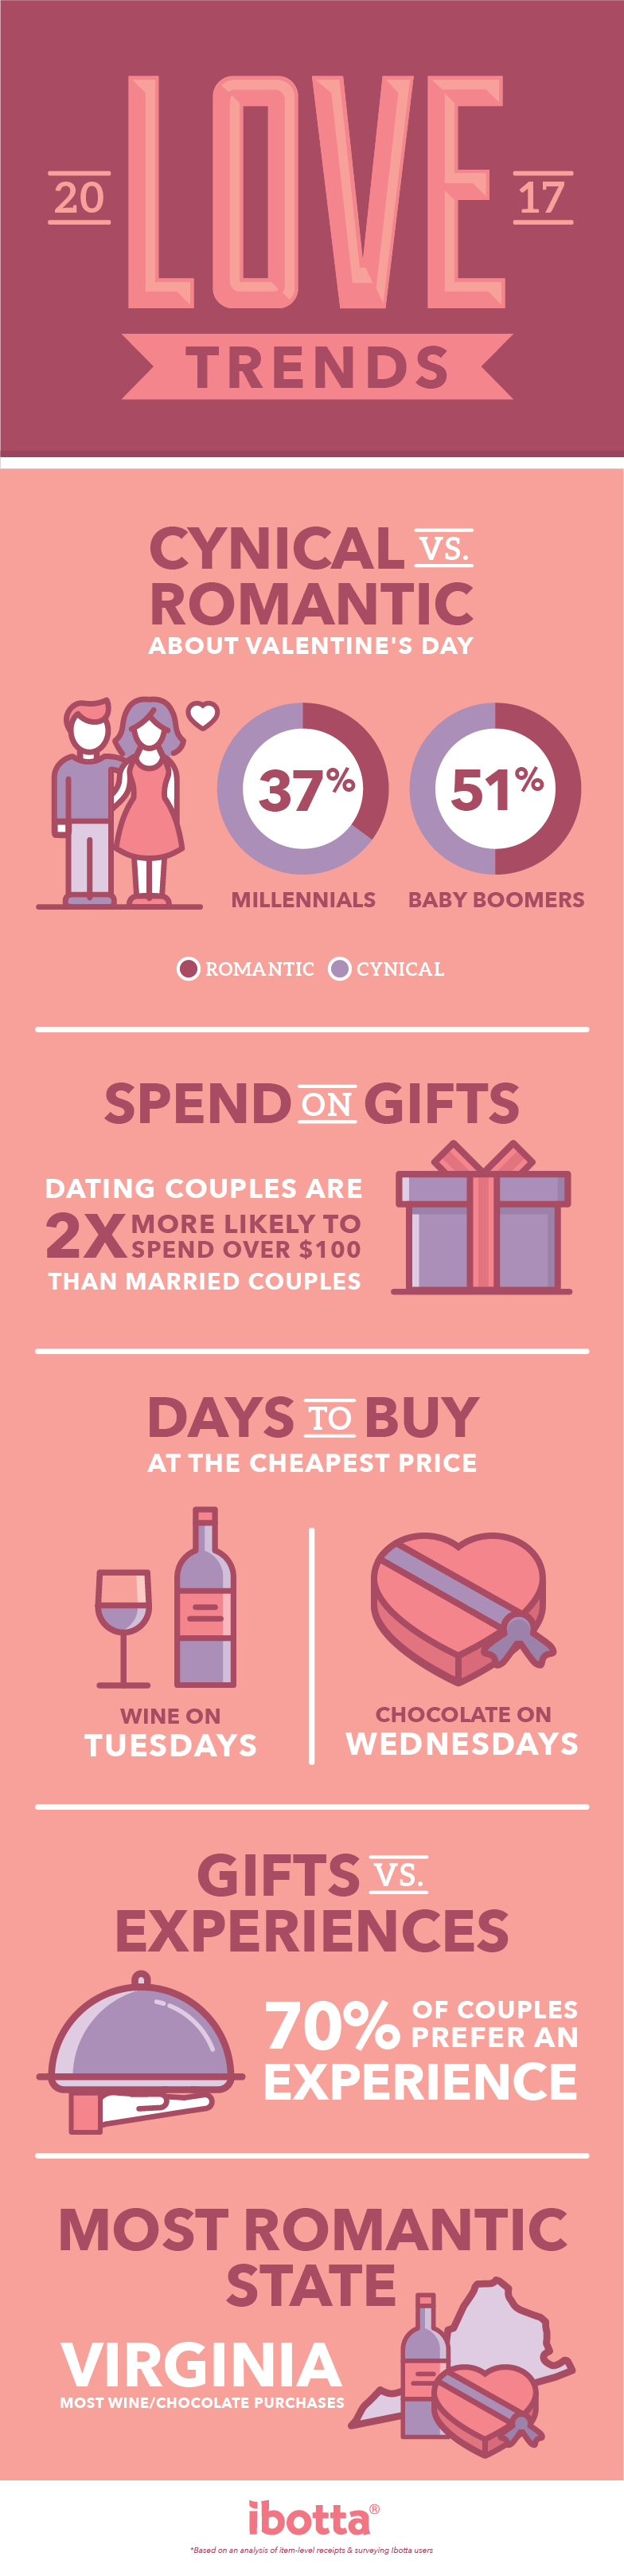 love-trends-infographic-01-1